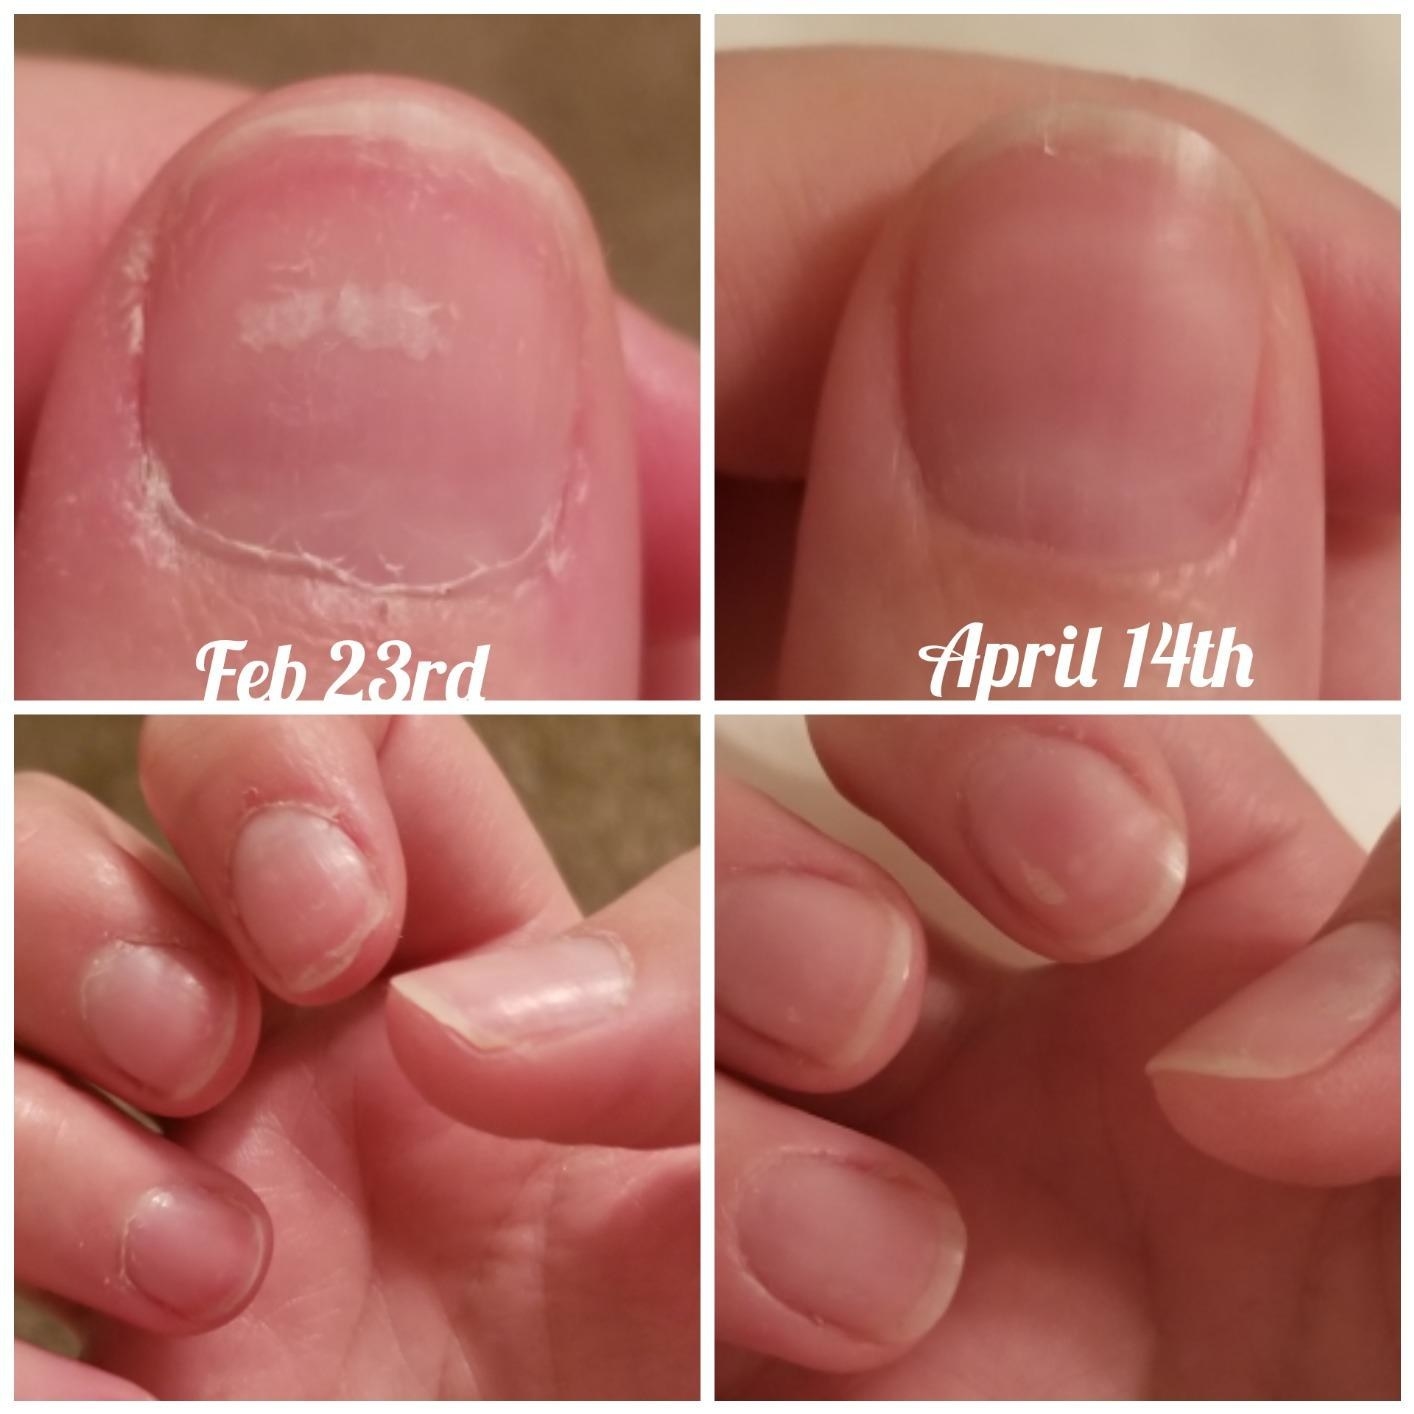 reviewer photo showing their nails dry and cracked, and then two weeks later looking perfectly healthy and shiny after using the Cuticle Care